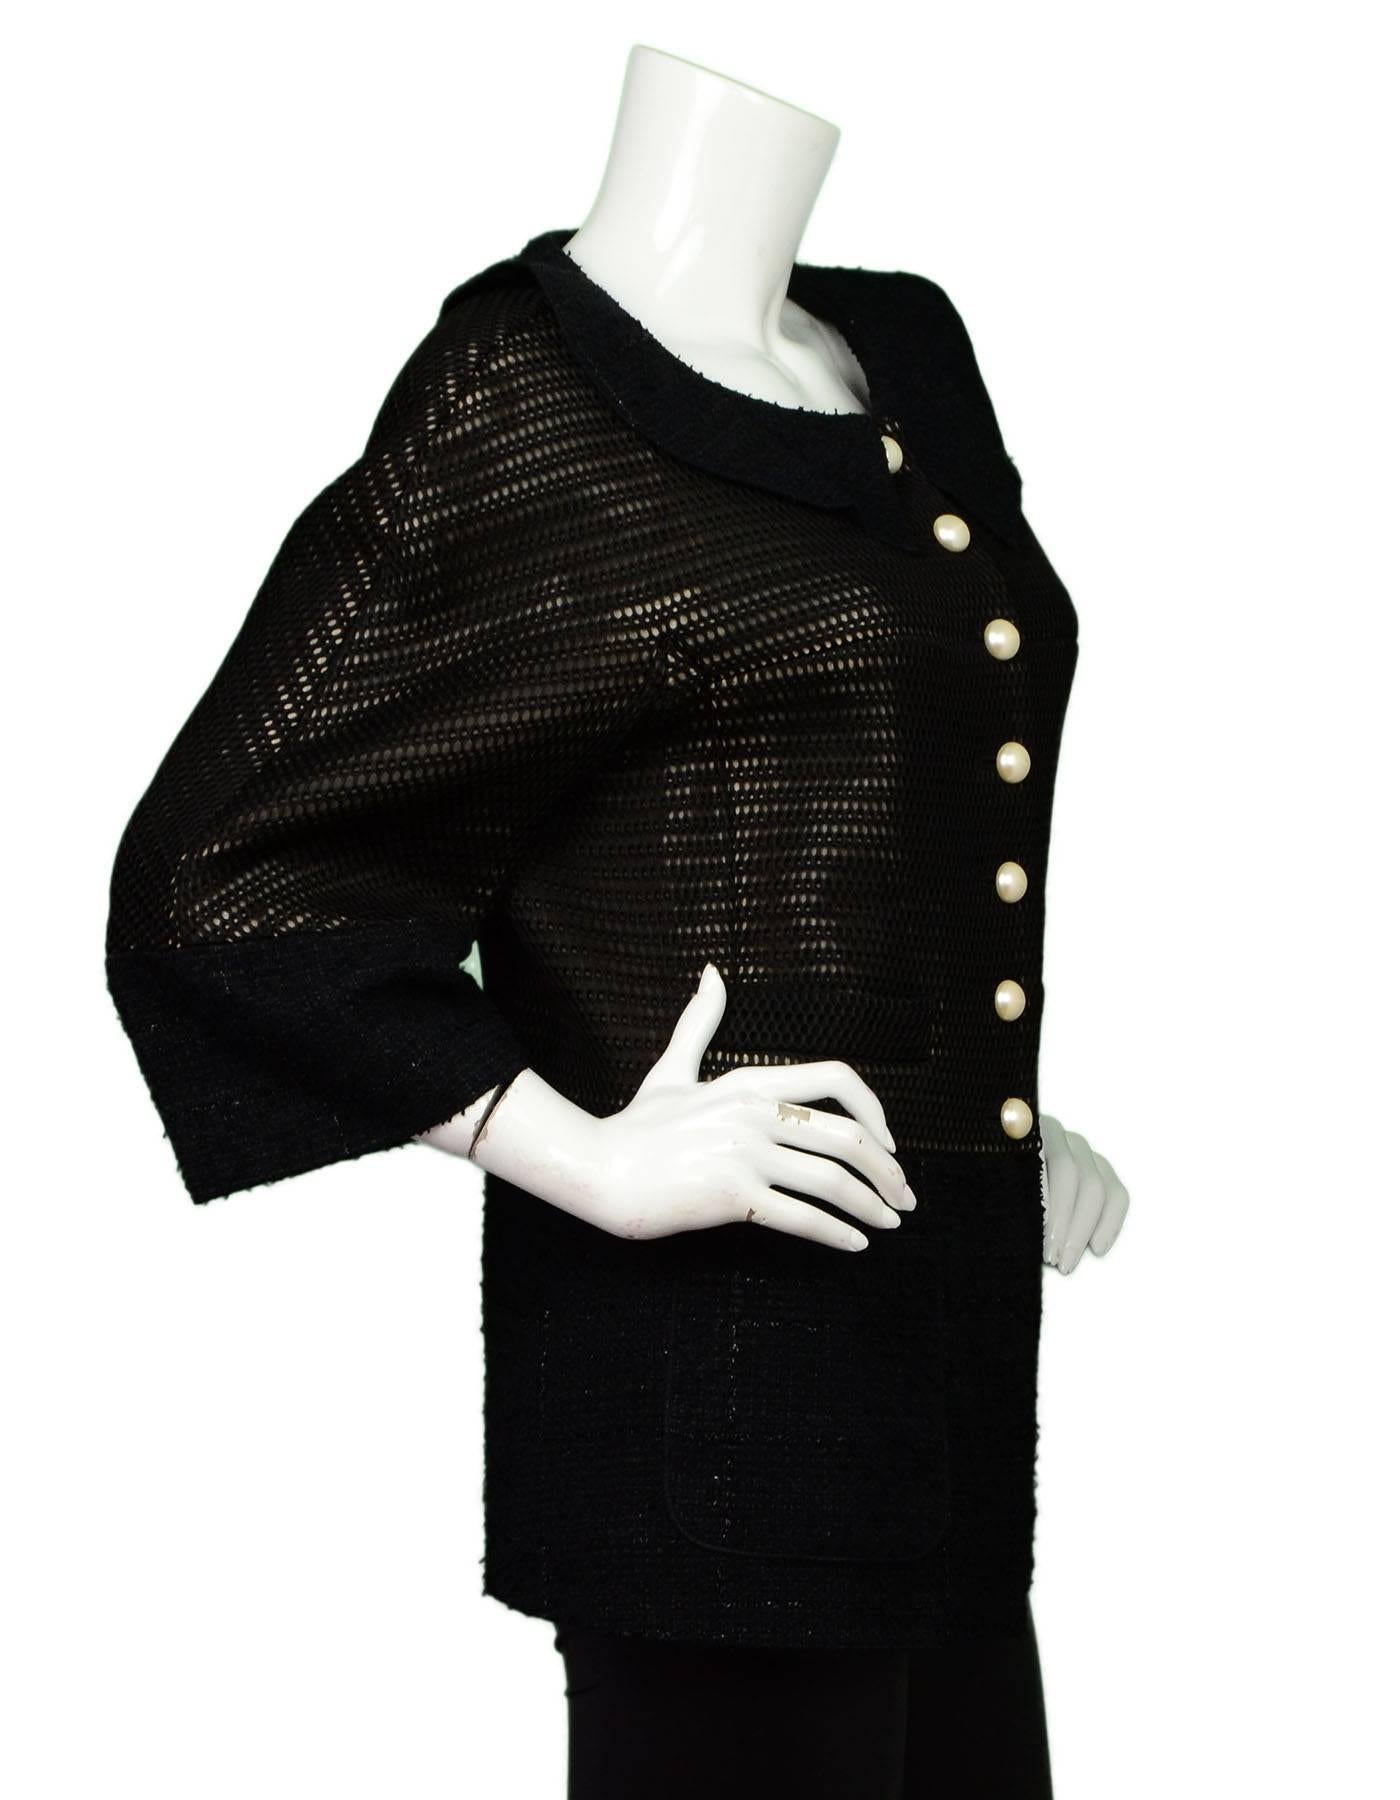 Chanel Black 3/4 Sleeve Swing Jacket
Features taupe inlay and pearl buttons

Made In: France
Color: Black
Composition: 100% nylon 
Lining: Black, 100% silk
Closure/Opening: Button front closure
Exterior Pockets: Four front patch